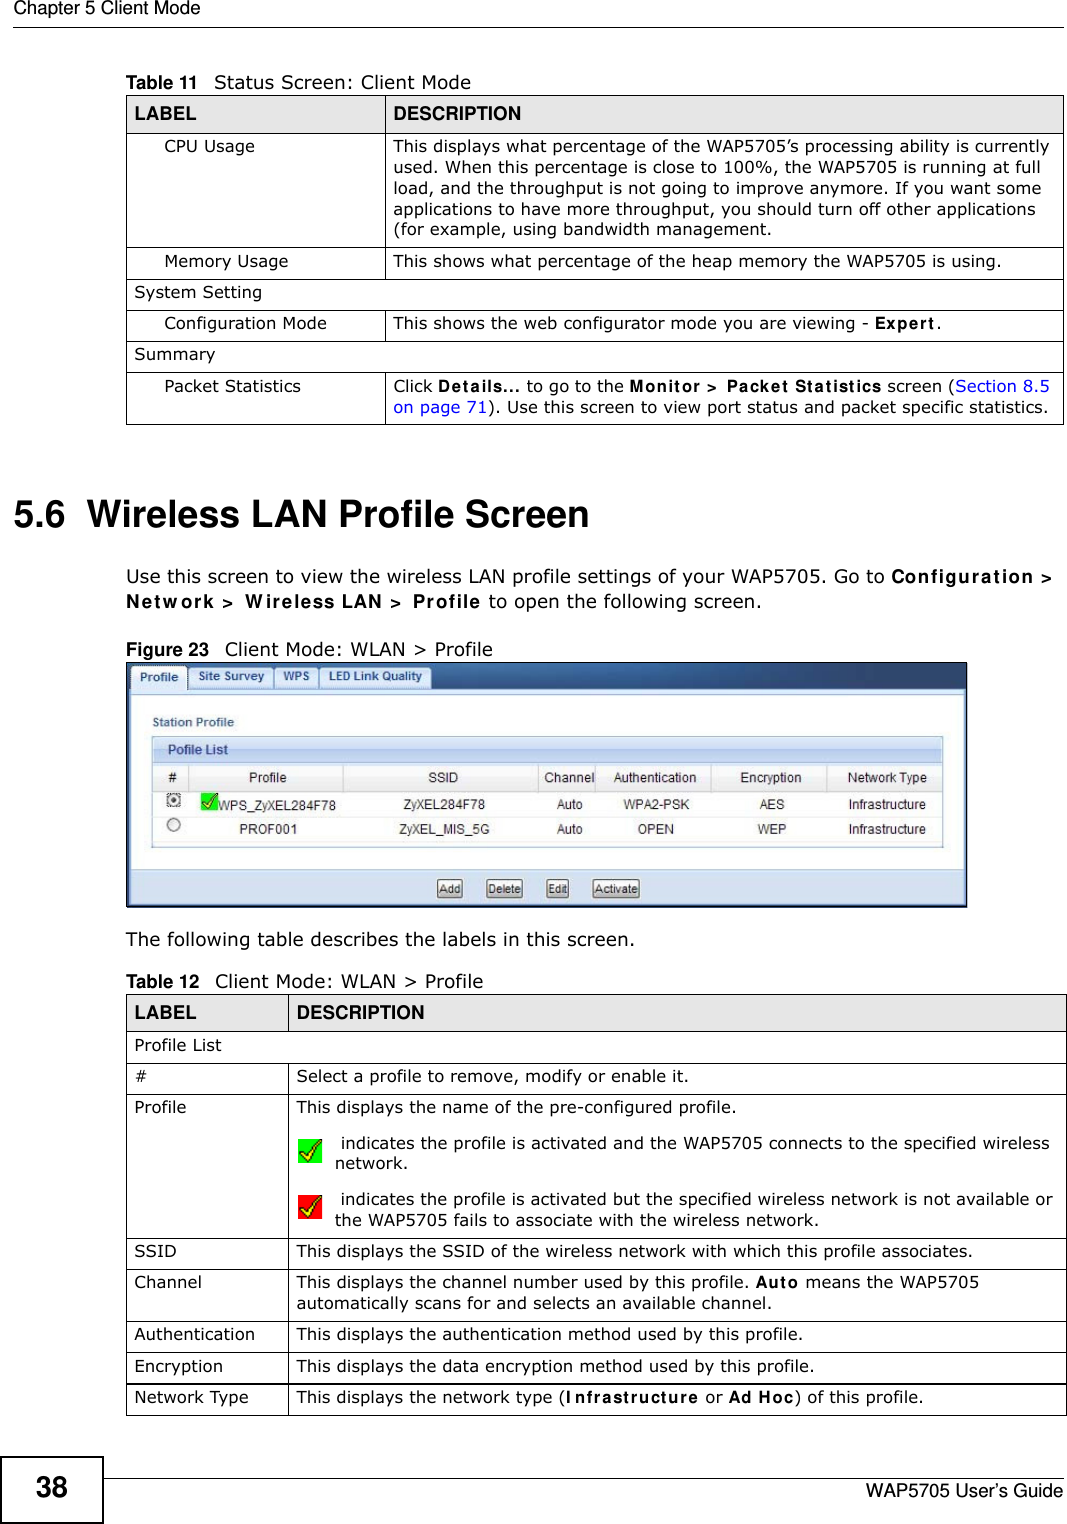 Chapter 5 Client ModeWAP5705 User’s Guide385.6  Wireless LAN Profile ScreenUse this screen to view the wireless LAN profile settings of your WAP5705. Go to Configura t ion  &gt;  N et w ork &gt;  W ireless LAN  &gt;  Pr ofile  to open the following screen.Figure 23   Client Mode: WLAN &gt; ProfileThe following table describes the labels in this screen. CPU Usage This displays what percentage of the WAP5705’s processing ability is currently used. When this percentage is close to 100%, the WAP5705 is running at full load, and the throughput is not going to improve anymore. If you want some applications to have more throughput, you should turn off other applications (for example, using bandwidth management.Memory Usage This shows what percentage of the heap memory the WAP5705 is using. System SettingConfiguration Mode This shows the web configurator mode you are viewing - Exper t .SummaryPacket Statistics Click De t a ils.. . to go to the Monit or  &gt;  Pa ck e t Sta tist ics screen (Section 8.5 on page 71). Use this screen to view port status and packet specific statistics.Table 11   Status Screen: Client Mode LABEL DESCRIPTIONTable 12   Client Mode: WLAN &gt; ProfileLABEL  DESCRIPTIONProfile List# Select a profile to remove, modify or enable it.Profile This displays the name of the pre-configured profile. indicates the profile is activated and the WAP5705 connects to the specified wireless network. indicates the profile is activated but the specified wireless network is not available or the WAP5705 fails to associate with the wireless network.SSID This displays the SSID of the wireless network with which this profile associates.Channel This displays the channel number used by this profile. Aut o means the WAP5705 automatically scans for and selects an available channel.Authentication This displays the authentication method used by this profile.Encryption This displays the data encryption method used by this profile.Network Type This displays the network type (I n fr a st r u ct u r e or Ad H oc) of this profile.